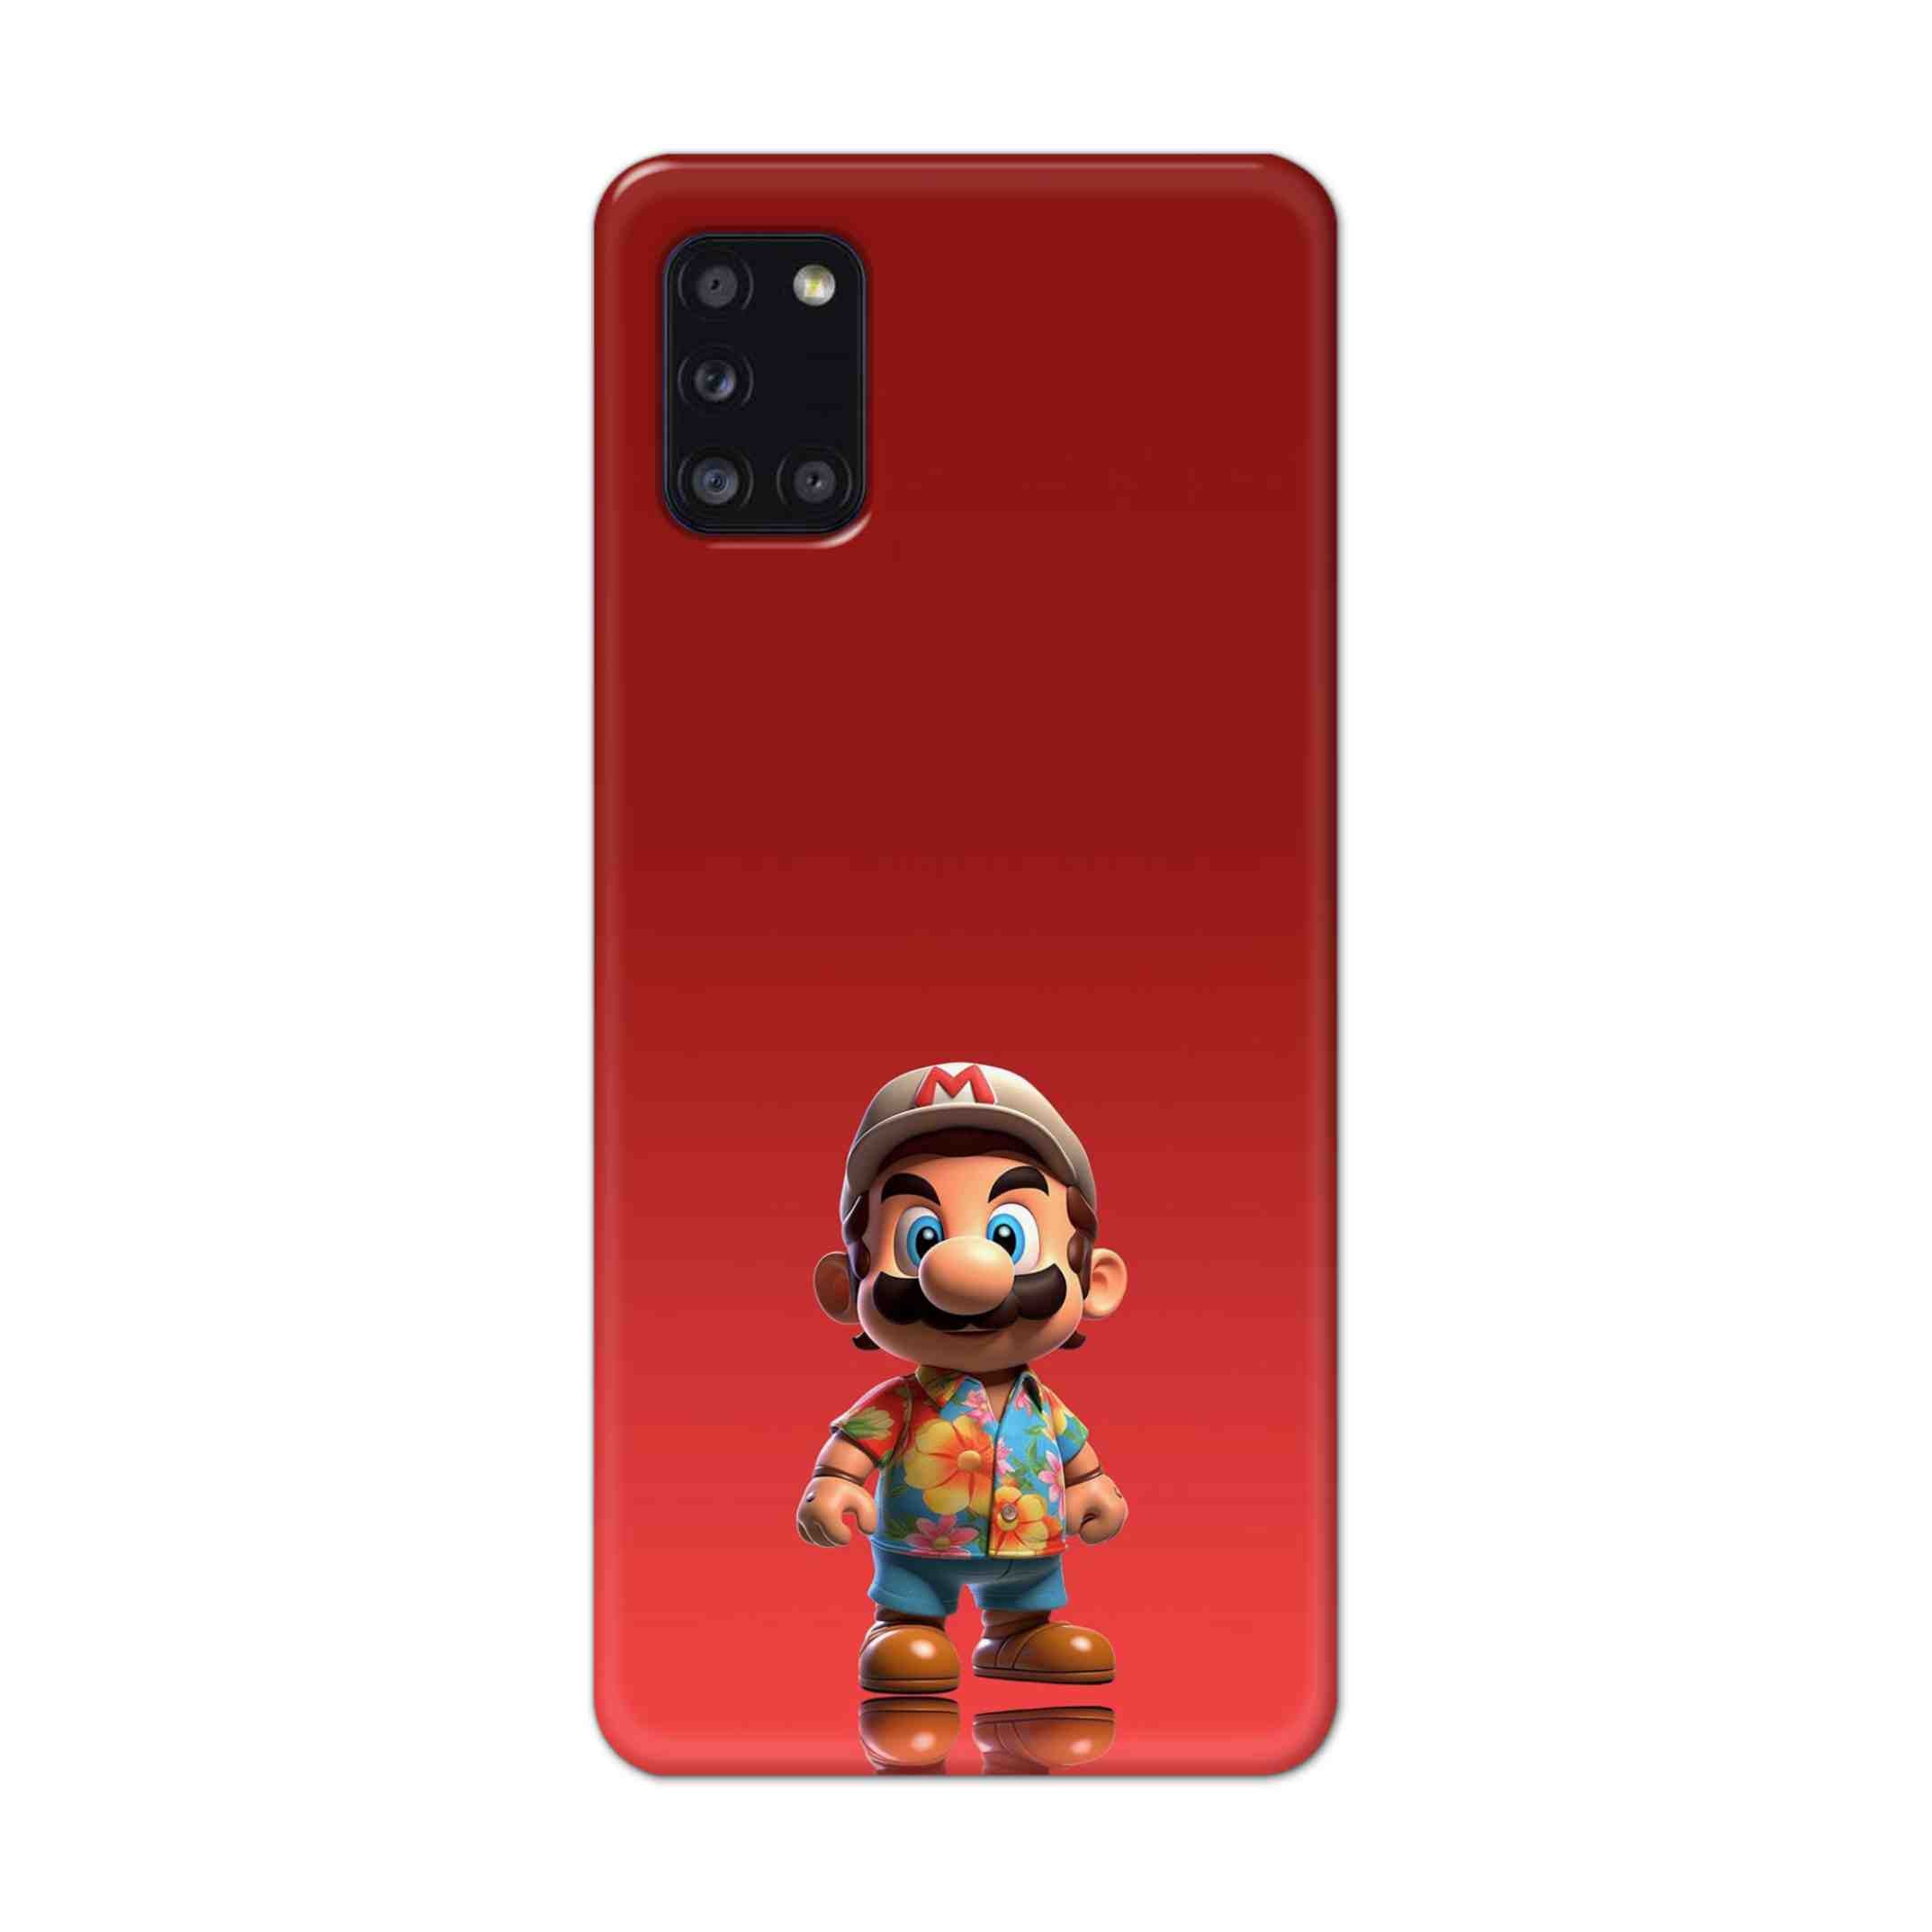 Buy Mario Hard Back Mobile Phone Case Cover For Samsung Galaxy A31 Online